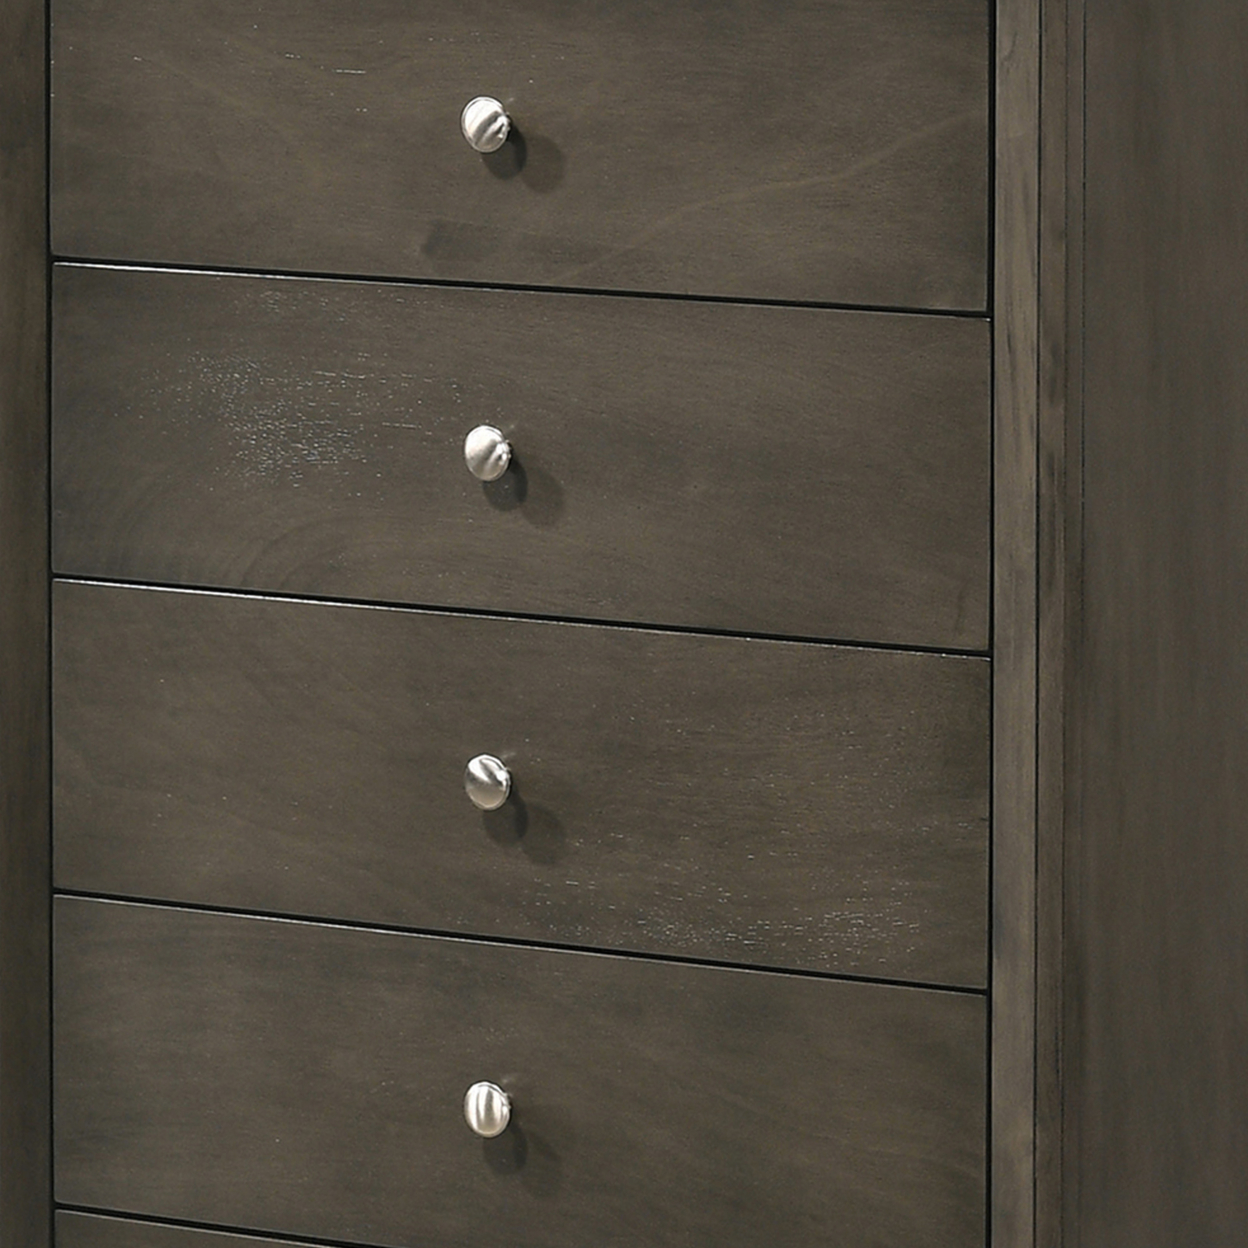 Transitional Style Wooden Chest With 5 Spacious Drawers, Gray- Saltoro Sherpi